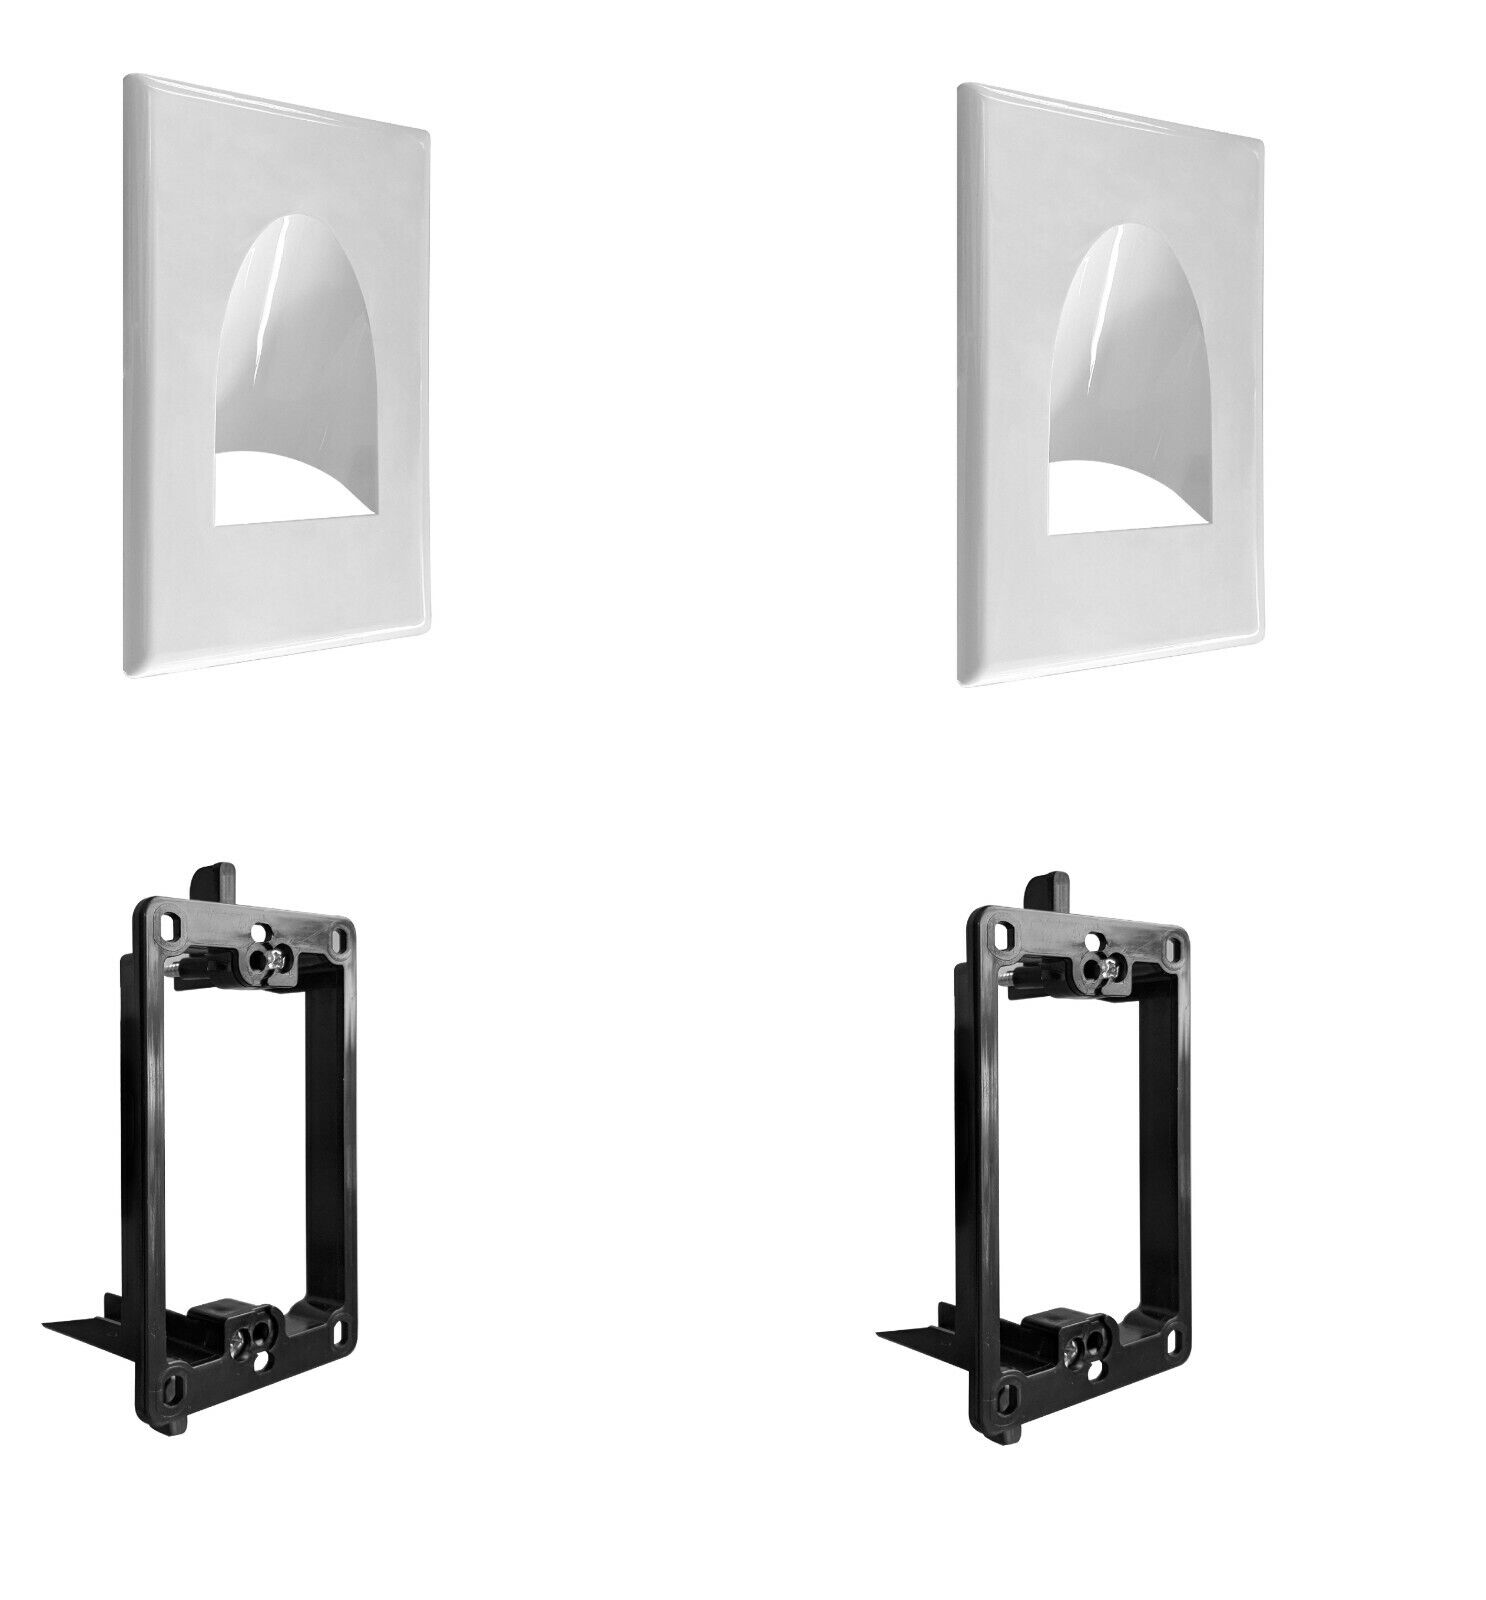 1-Gang Recessed Low Voltage Wall Plate with Mounting Bracket (2-Pack, White)